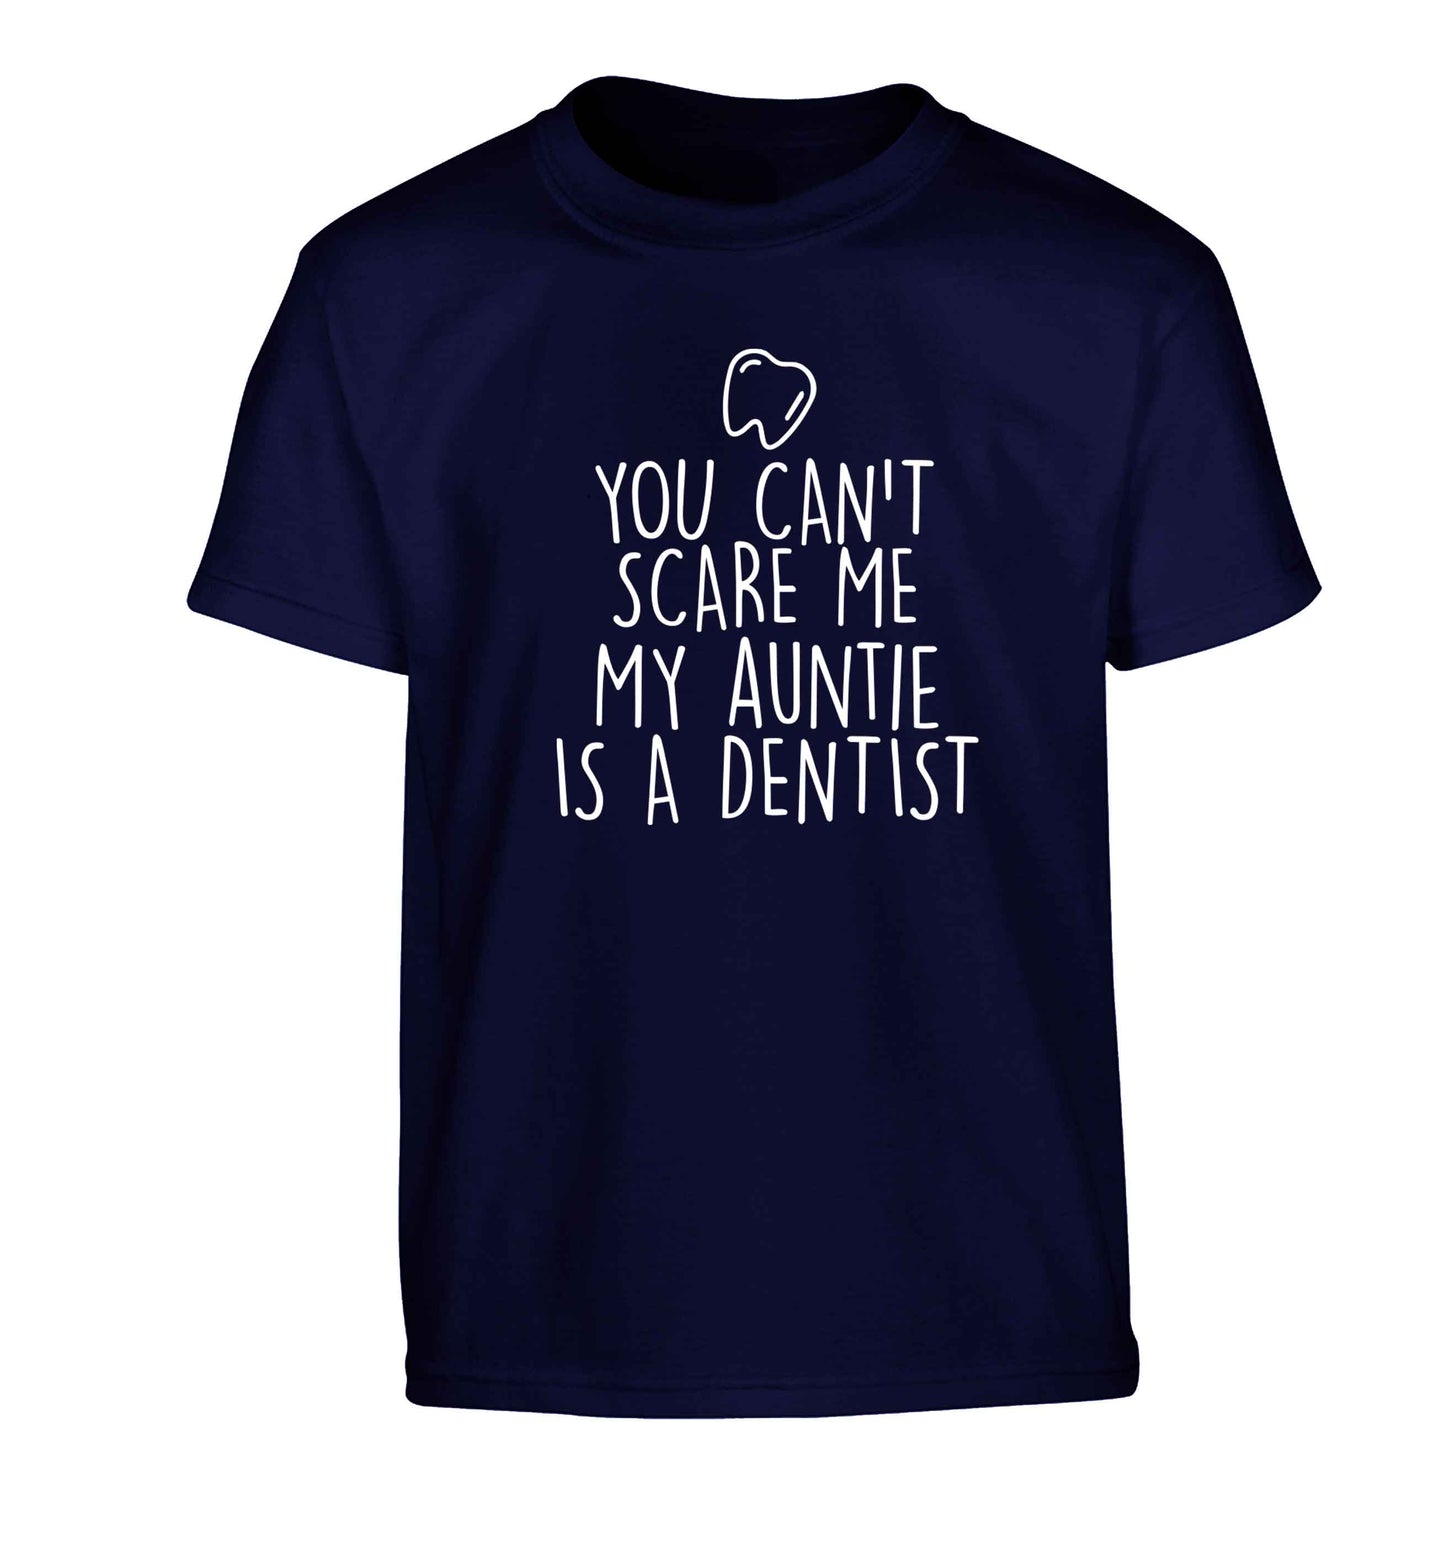 You can't scare me my auntie is a dentist Children's navy Tshirt 12-13 Years